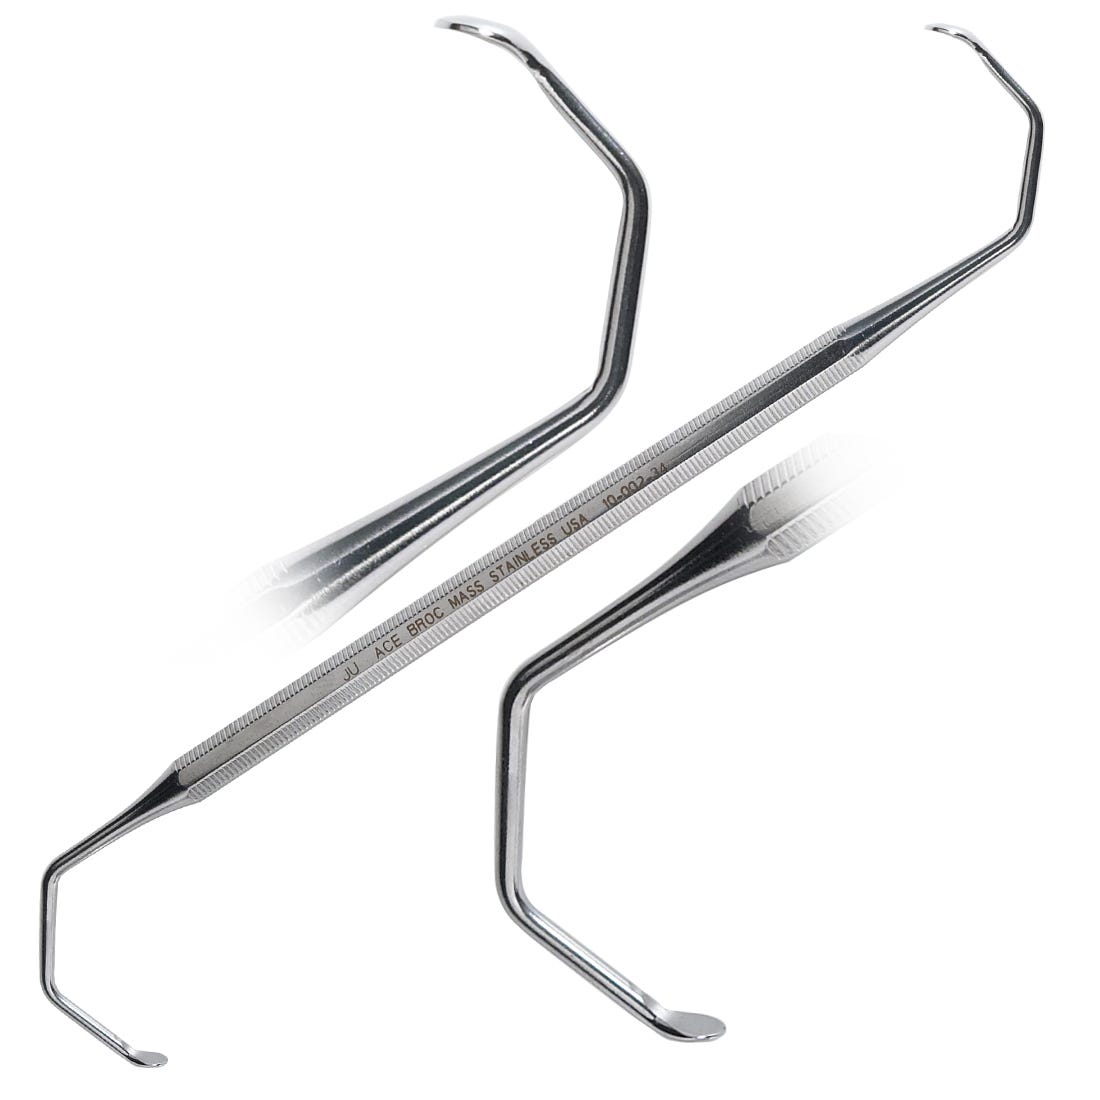 ACE Antral Curette #3, double ended